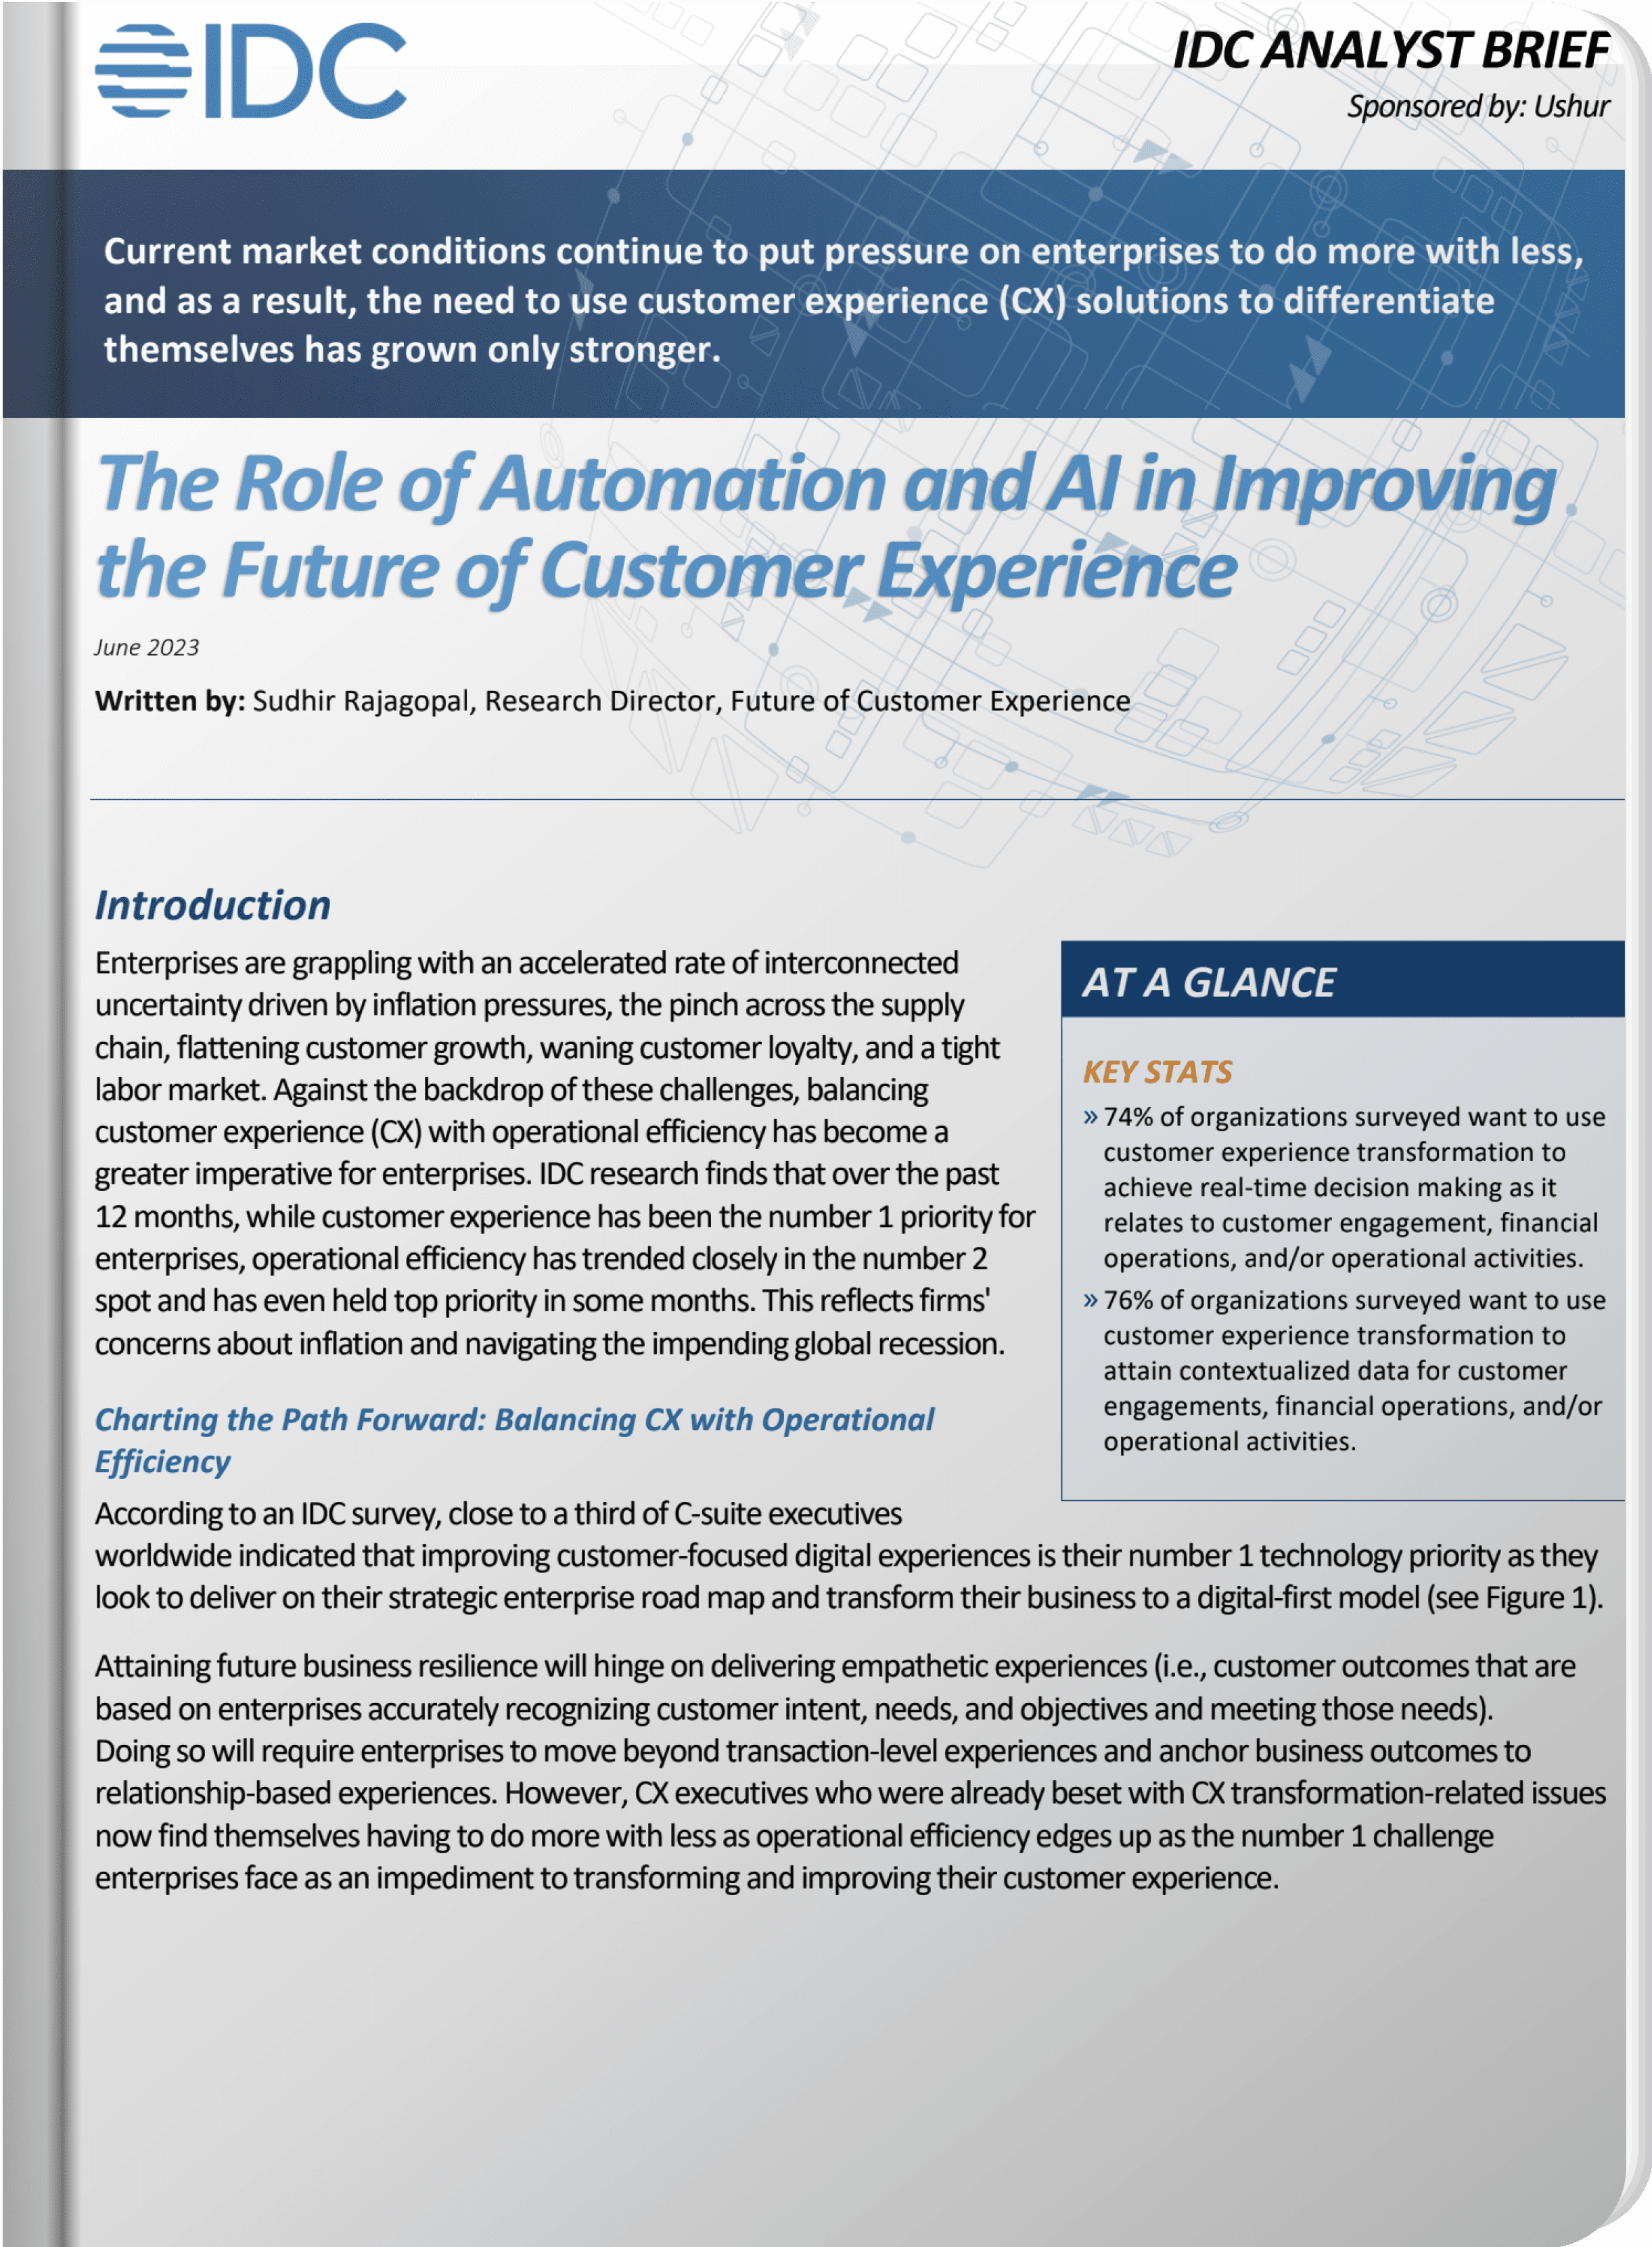 IDC: The Role of Automation and AI in Improving the Future of Customer Experience asset image